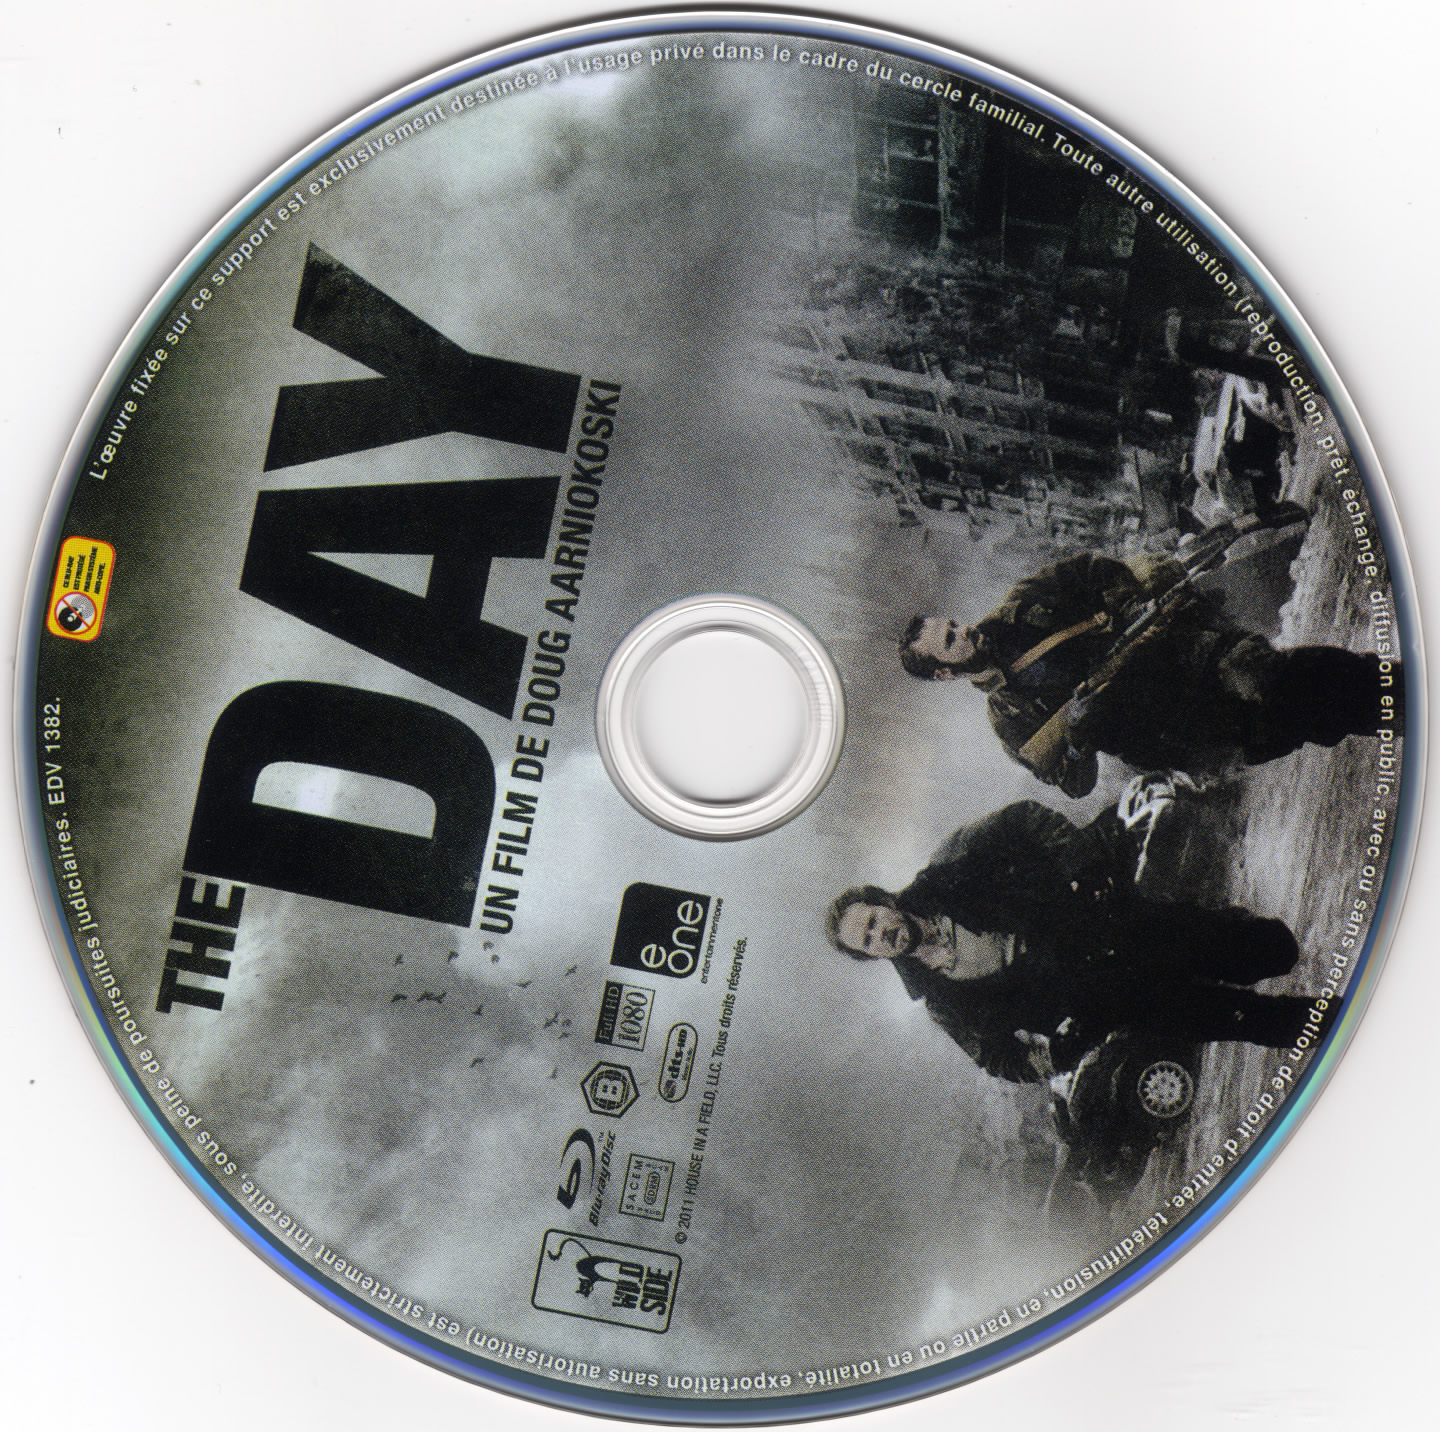 The Day (BLU-RAY)